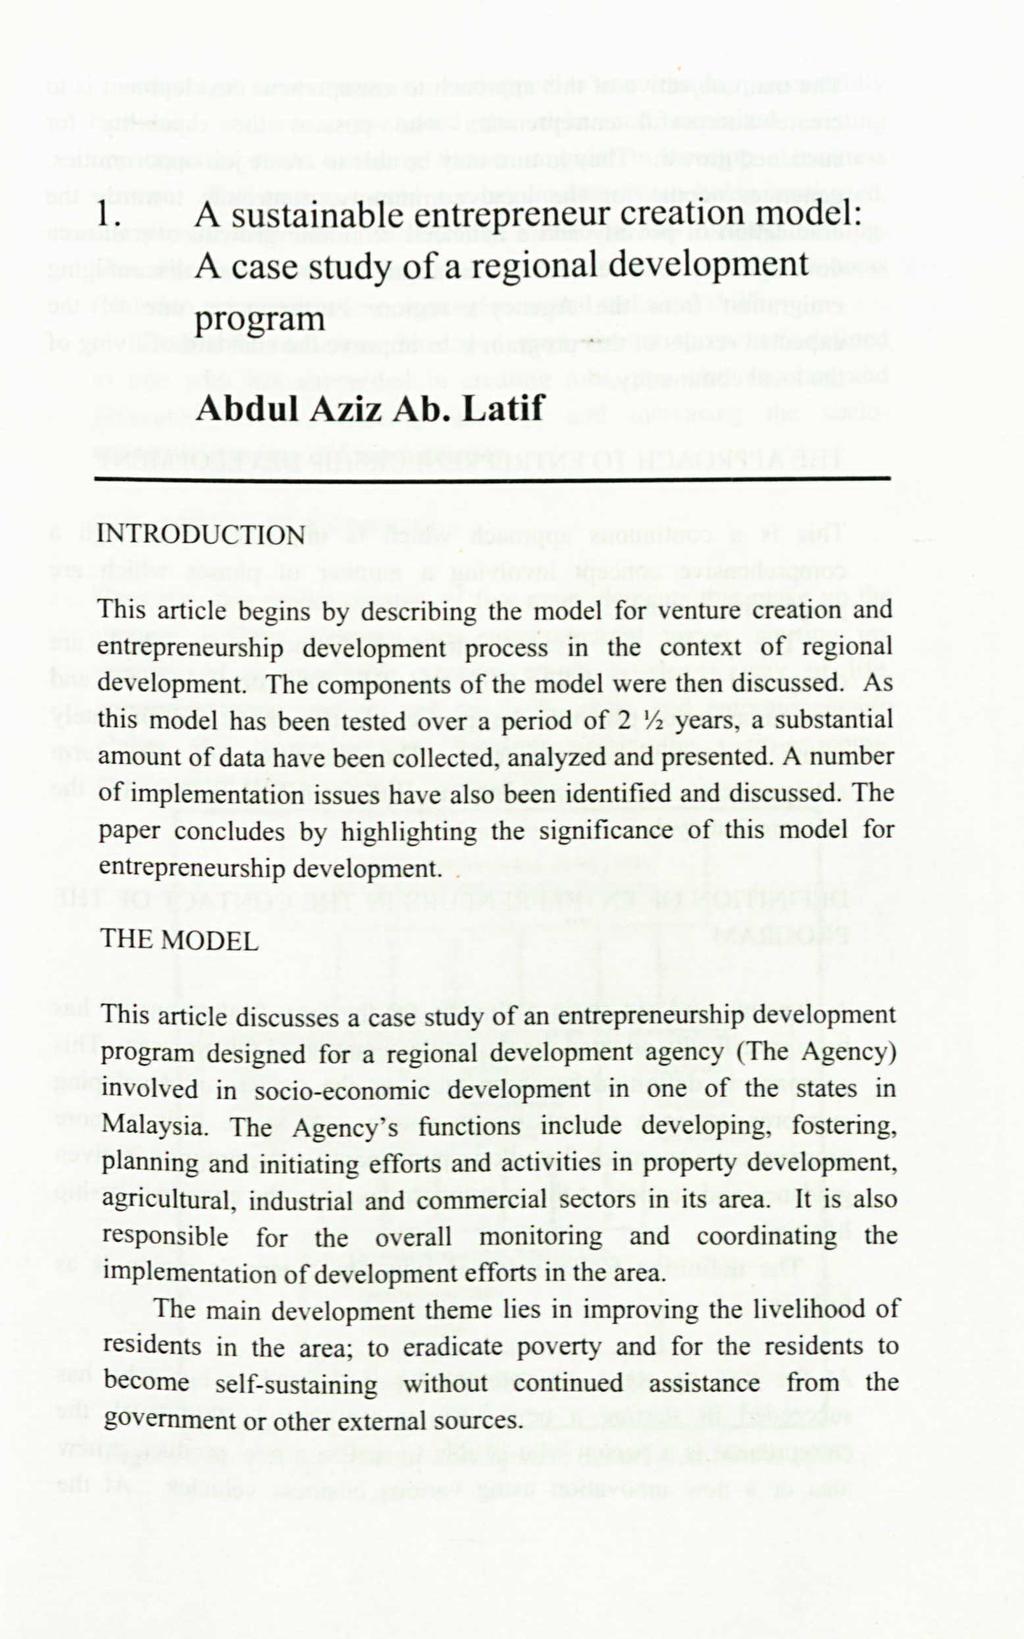 1. A sustainable entrepreneur creation model: A case study of a regional development program INTRODUCTION This article begins by describing the model for venture creation and entrepreneurship